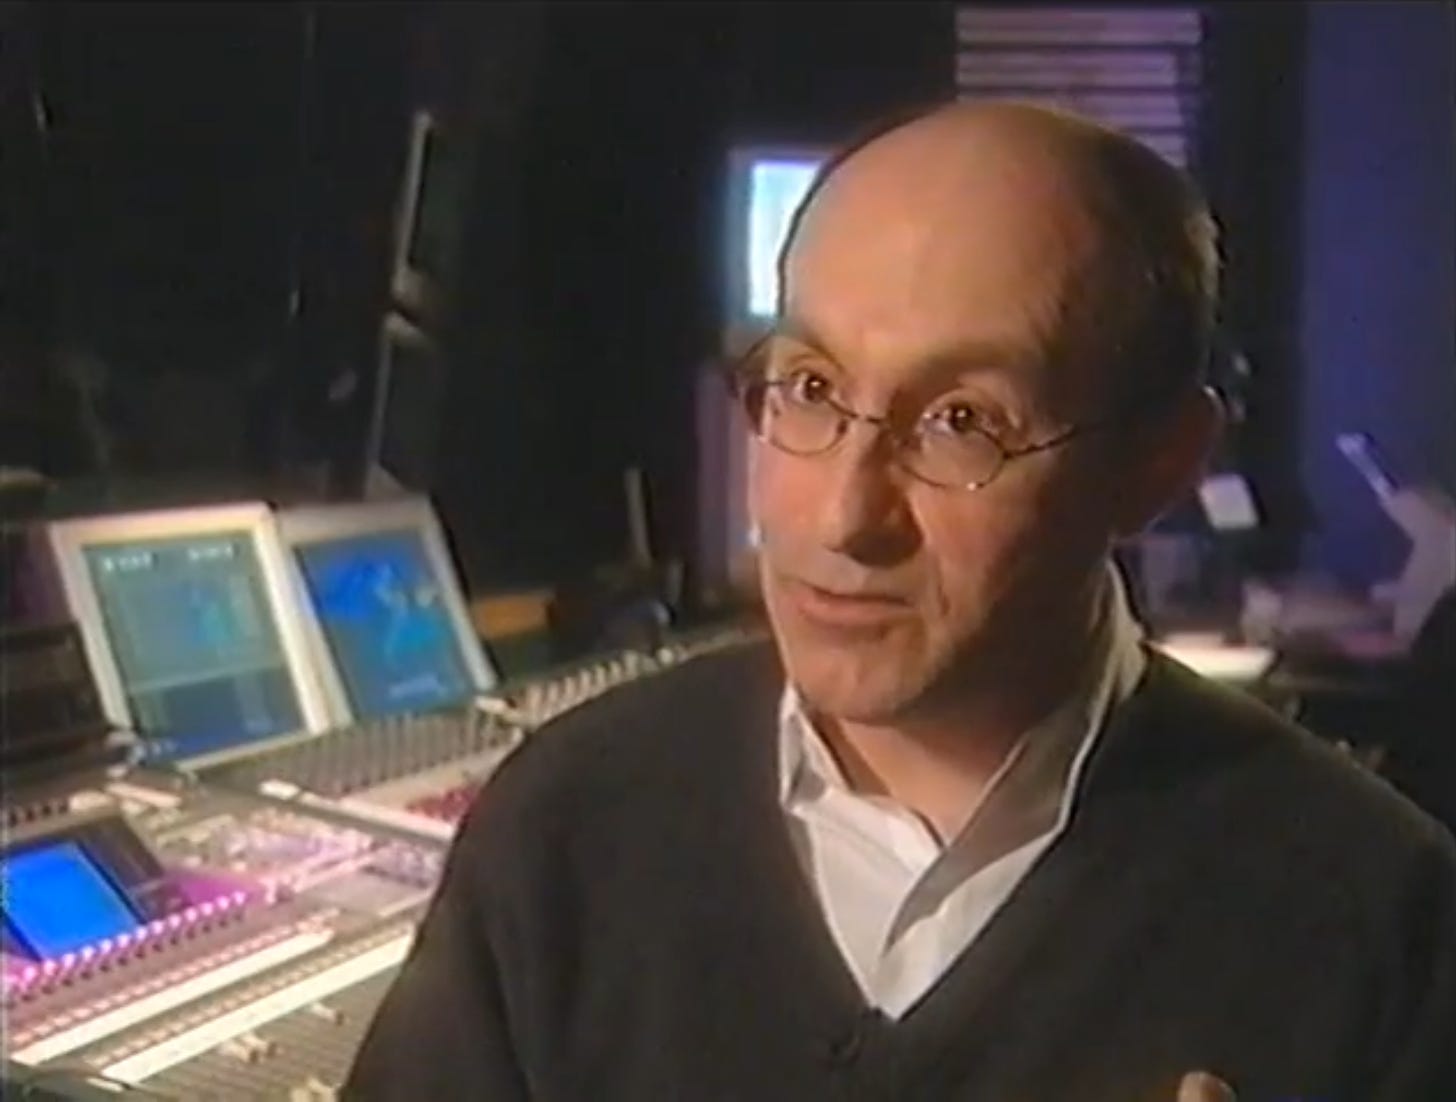 Mike in a video from 2001 discussing the process of recording voiceovers for Pokémon 3 the Movie: Spell of the Unown